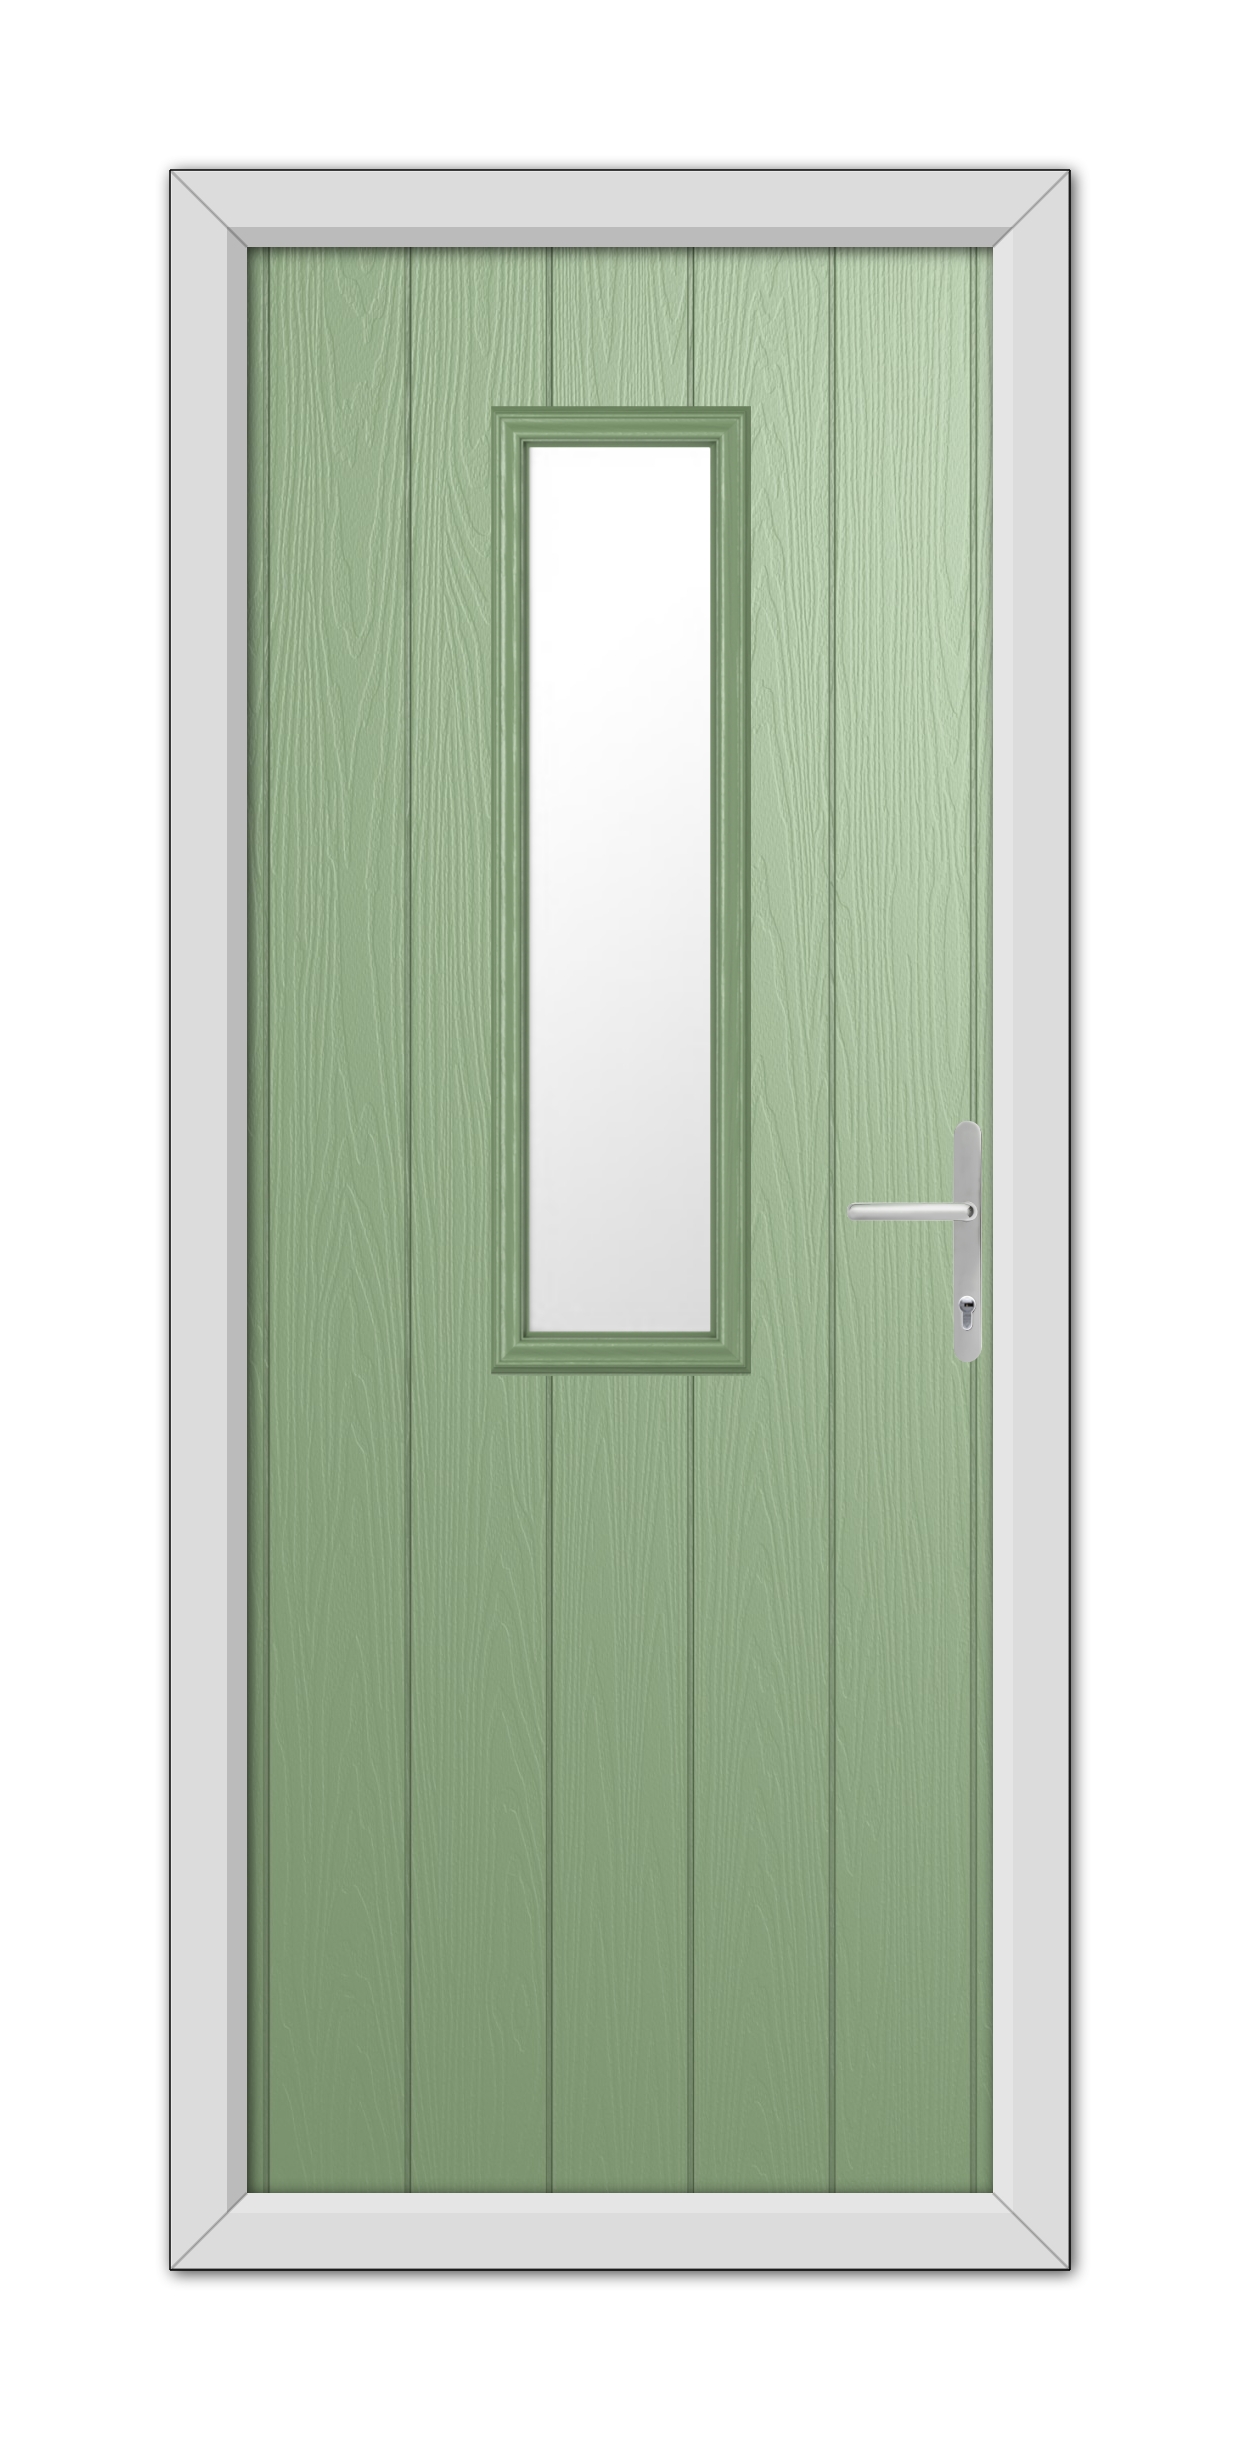 A Chartwell Green Mowbray Composite Door 48mm Timber Core with a vertical rectangular window and a modern handle, set within a gray frame.